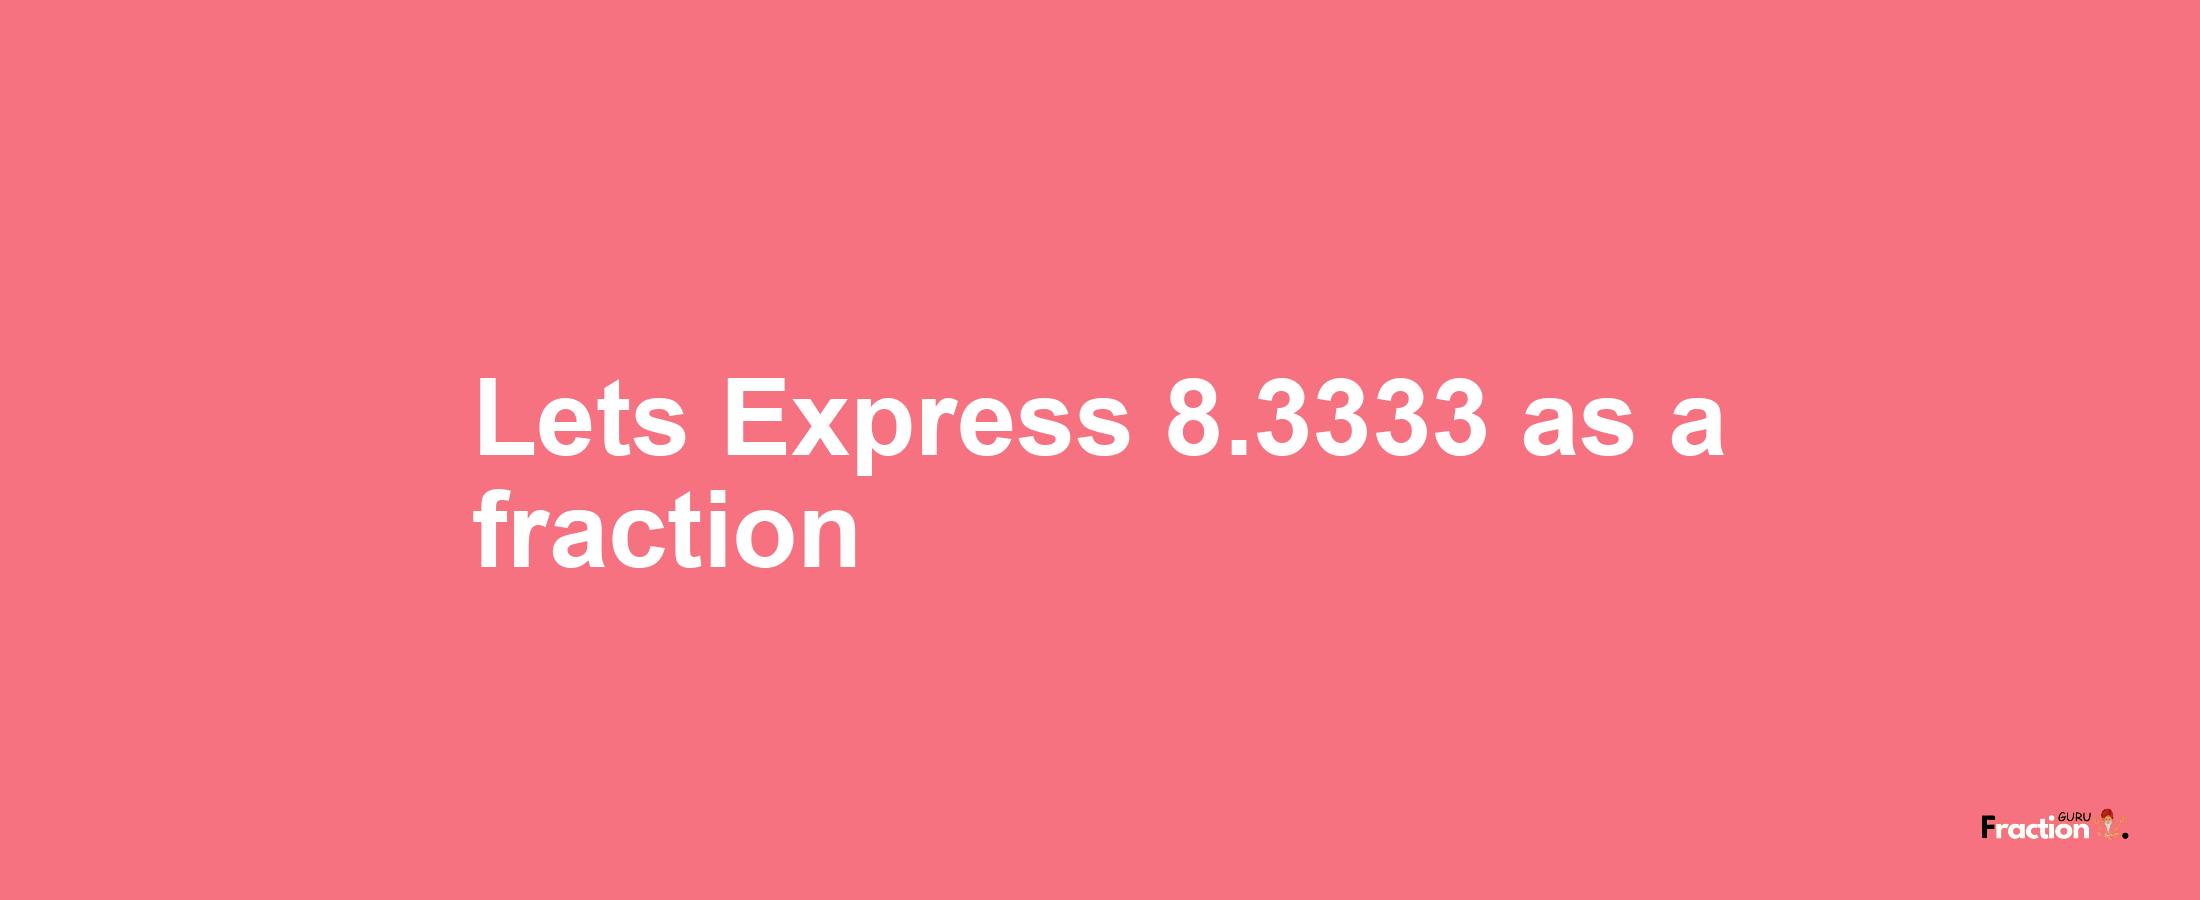 Lets Express 8.3333 as afraction